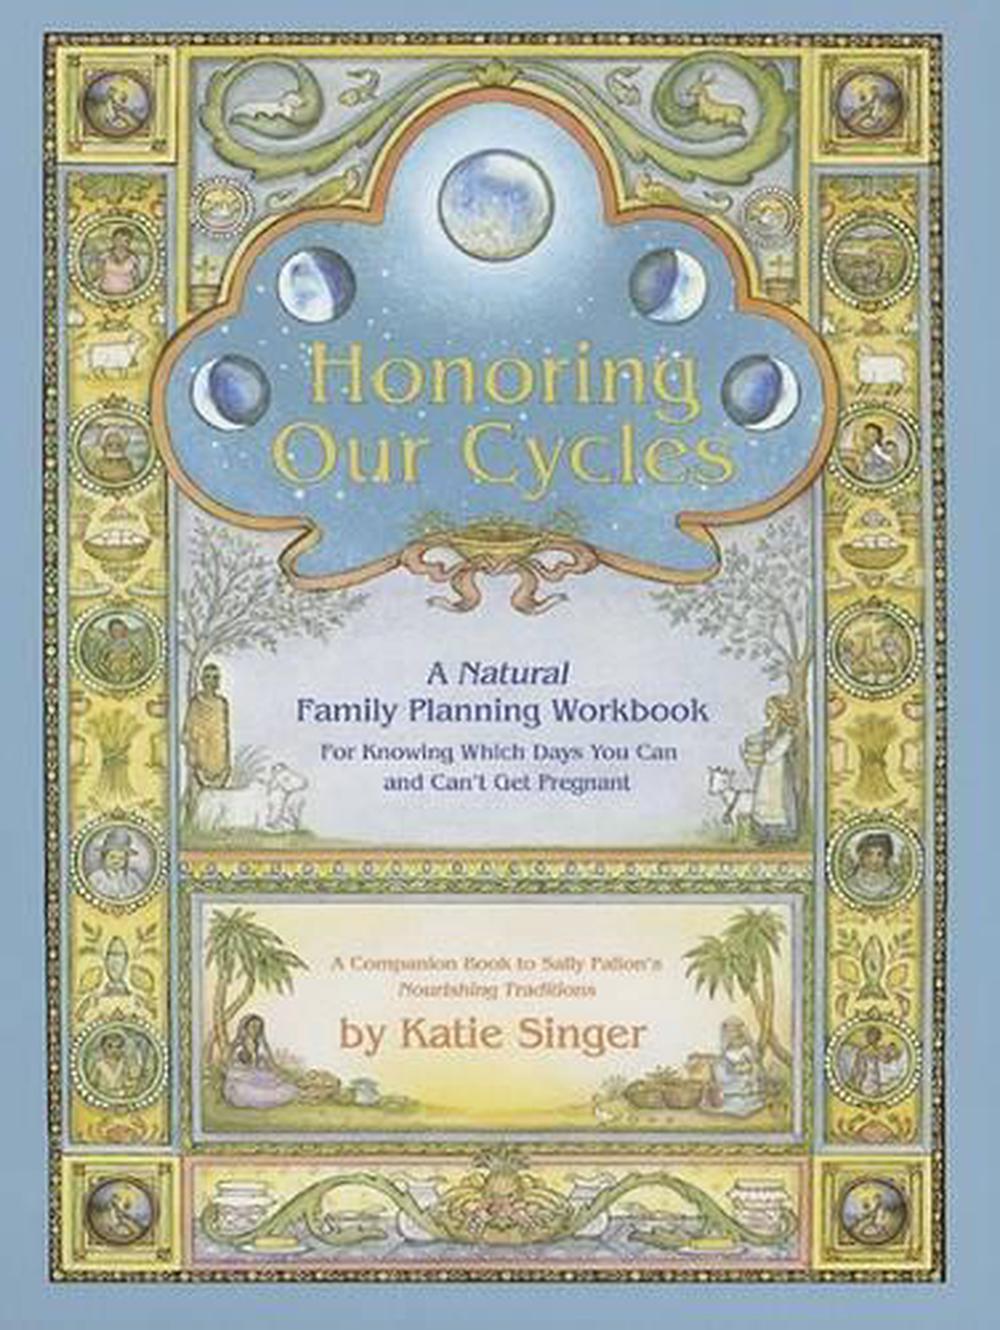 Honoring Our Cycles A Natural Family Planning Workbook by Katie Singer (English eBay